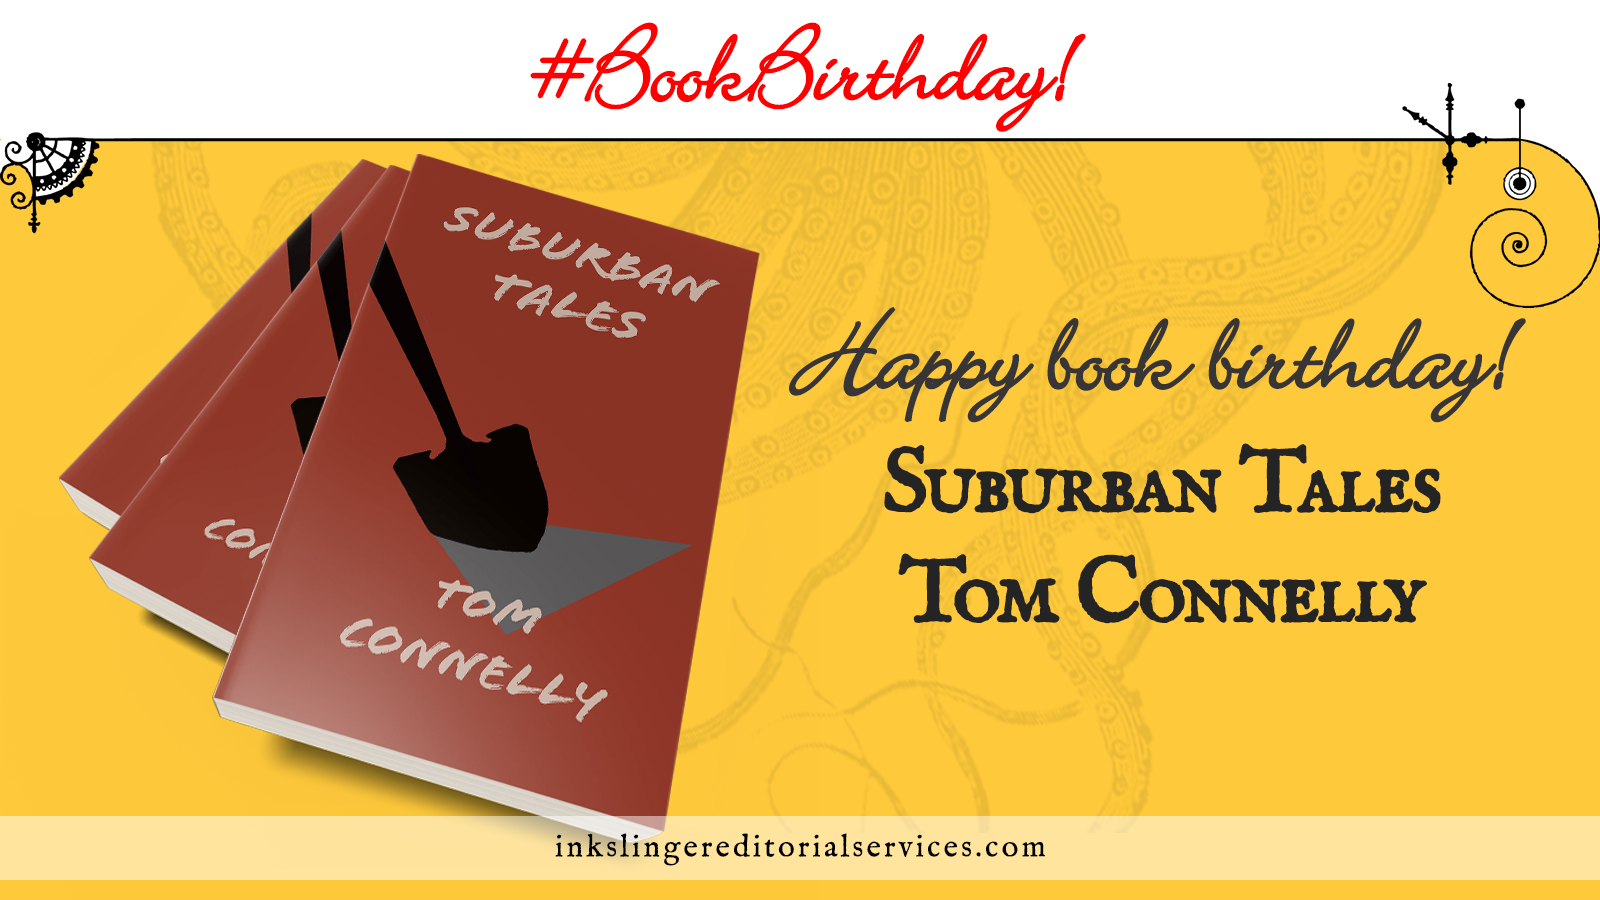 #BookBirthday! Happy book birthday! Suburban Tales by Tom Connelly. A stack of 3 books spread over a yellow field with tentacles faded in the background. The cover is a silhouette of a shovel in a stylized gray hole over a maroon field.